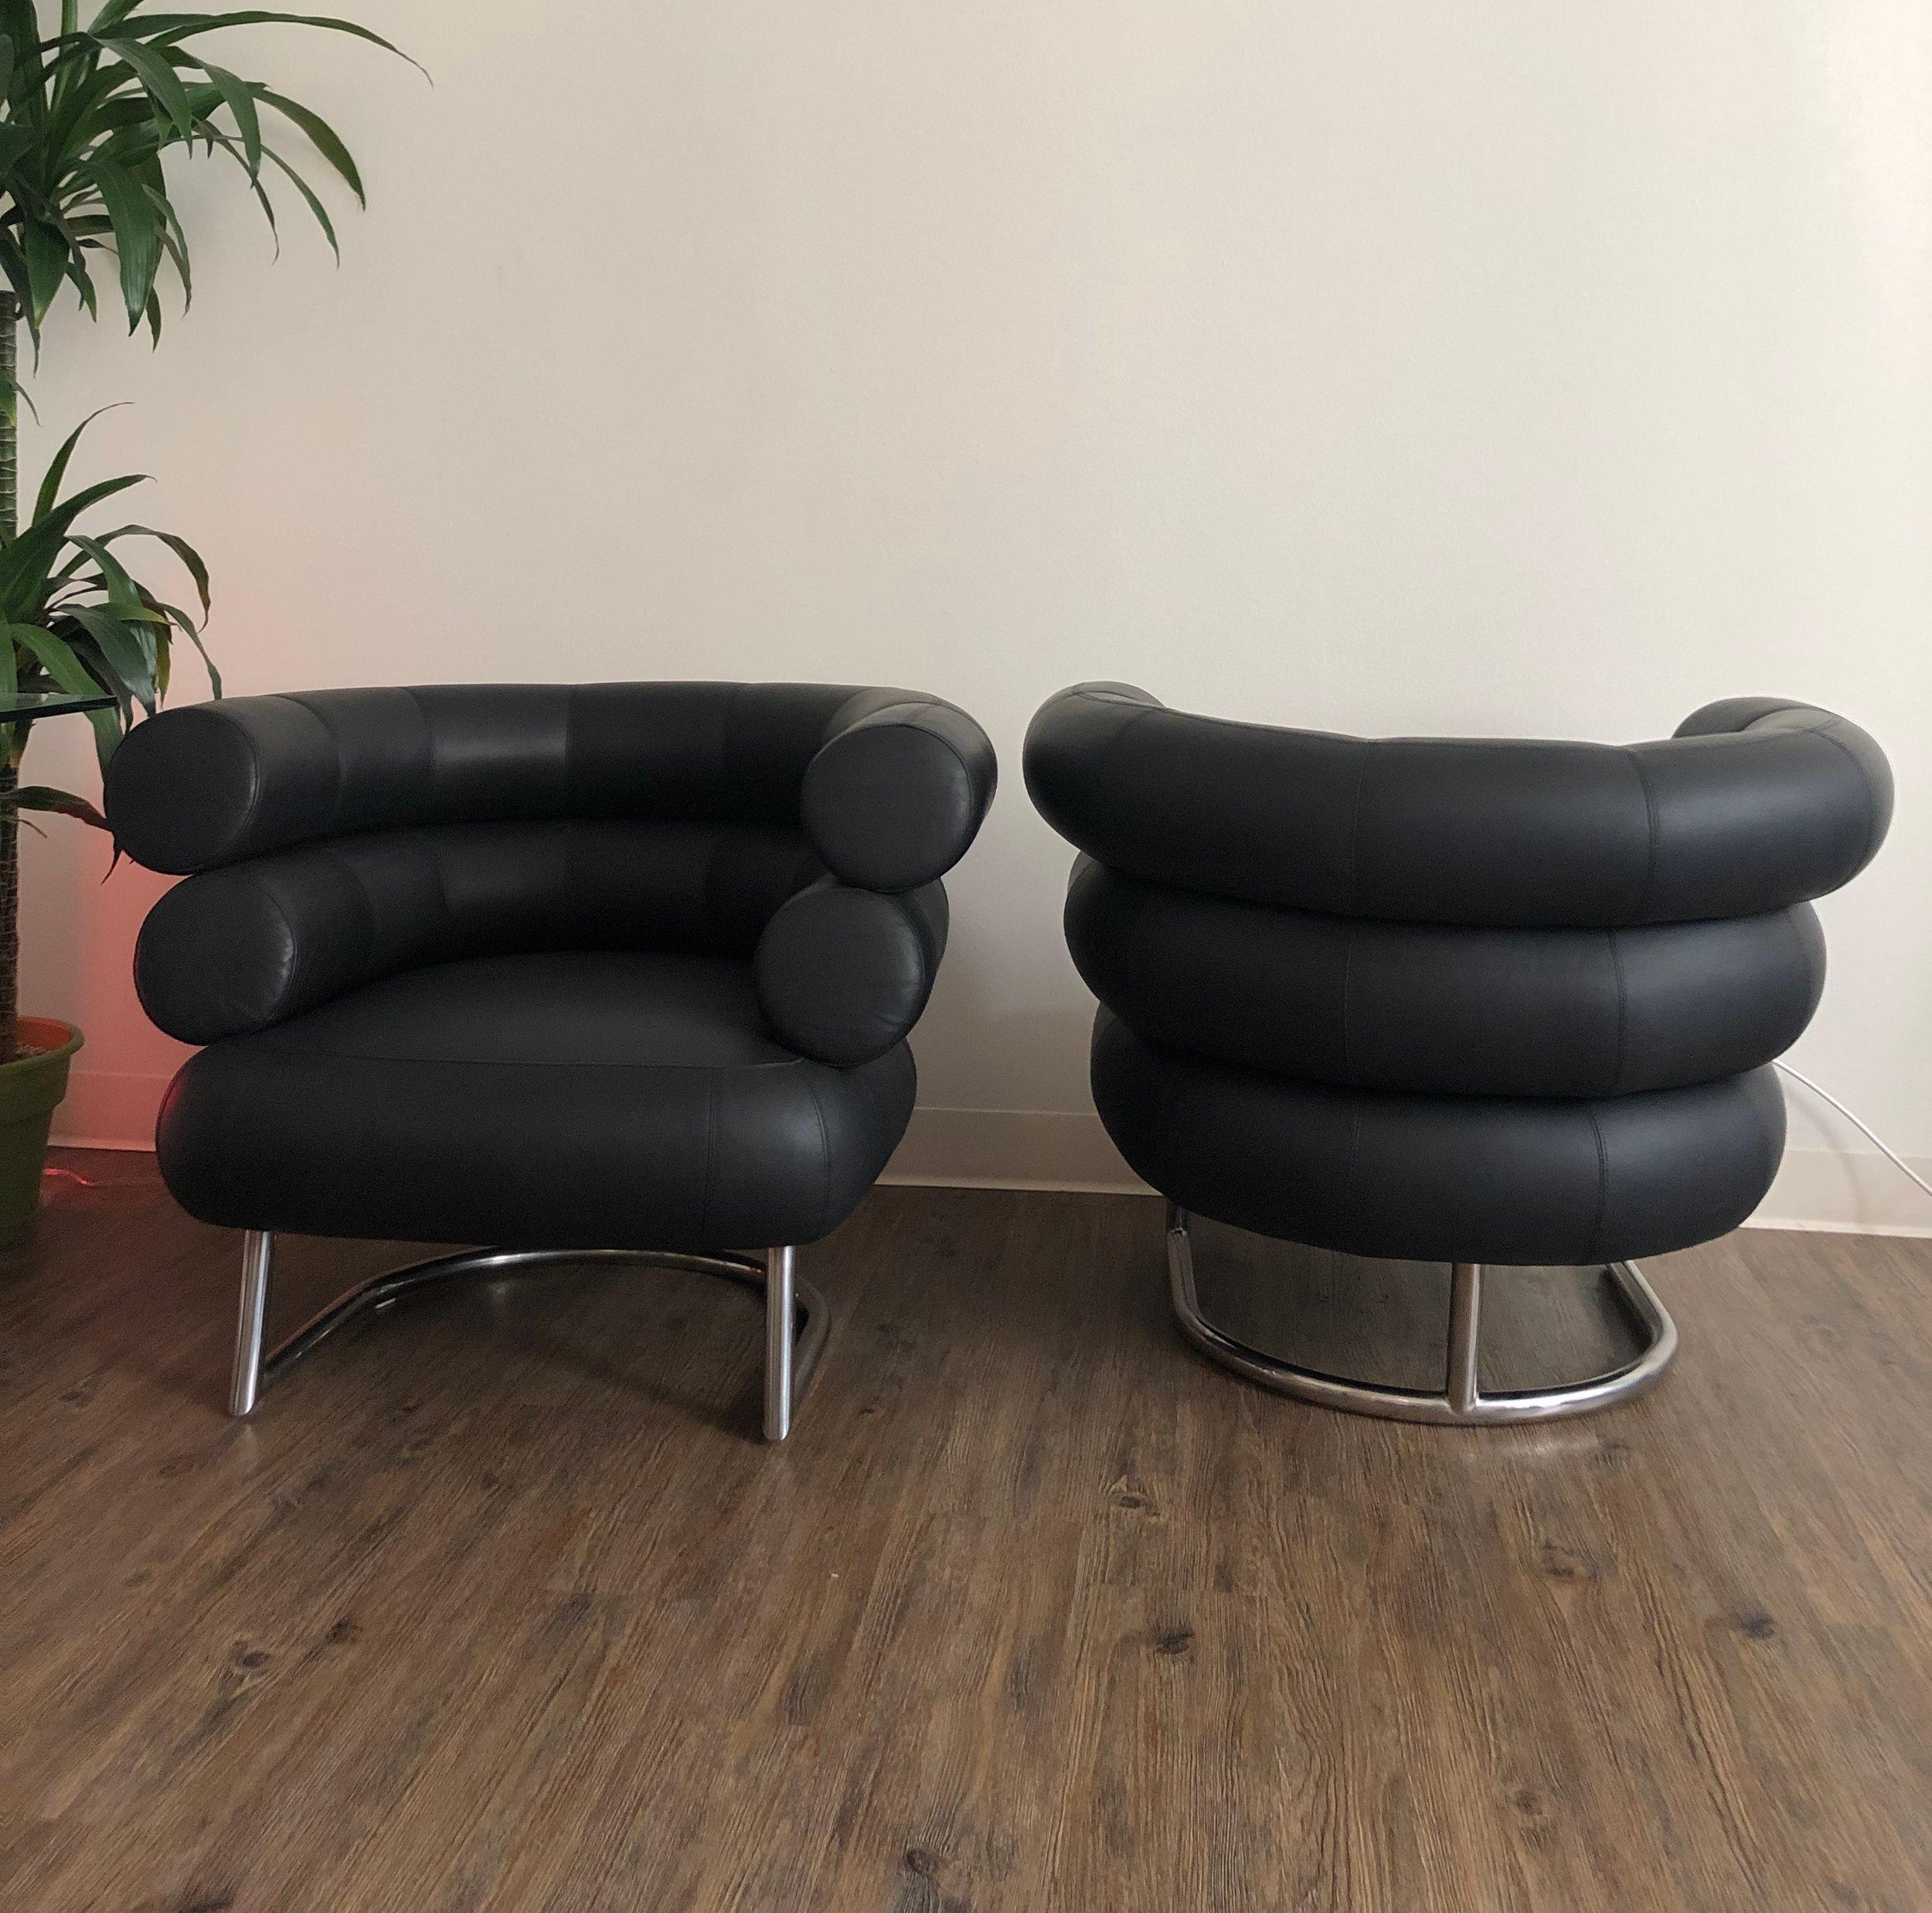 2 Black Leather Eileen Gray Design Of The BIBENDUM Chairs Chrome Base Art Deco  In Good Condition For Sale In Monrovia, CA